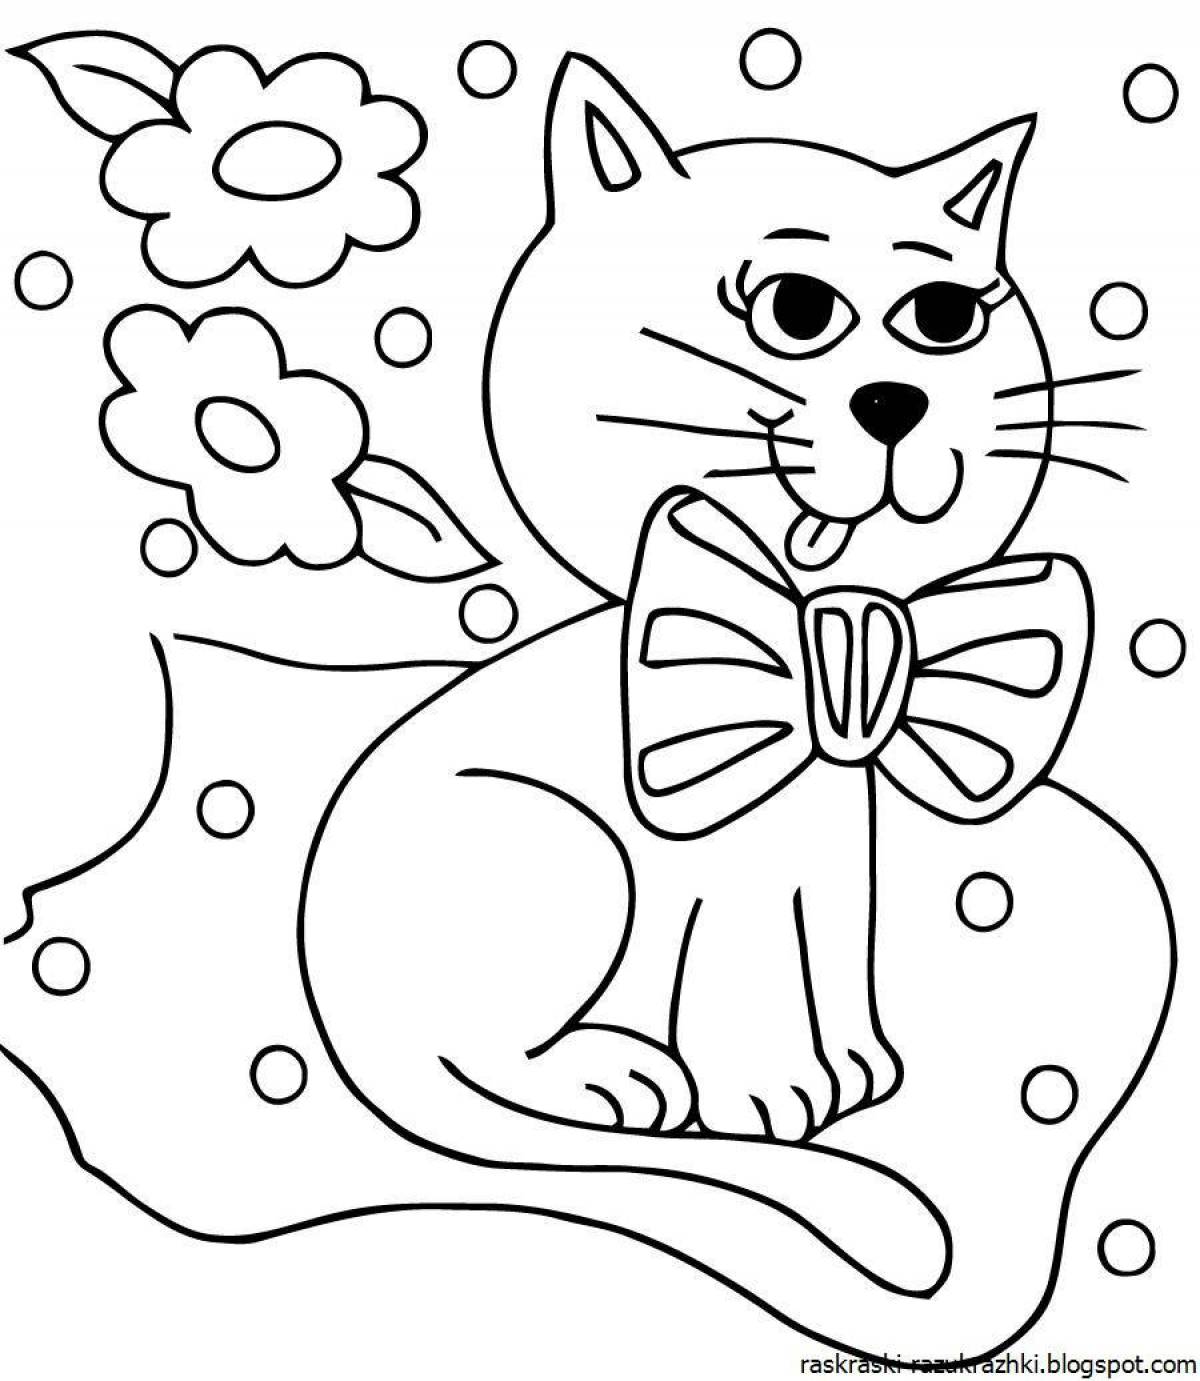 Hypnotic cat coloring book for children 6-7 years old